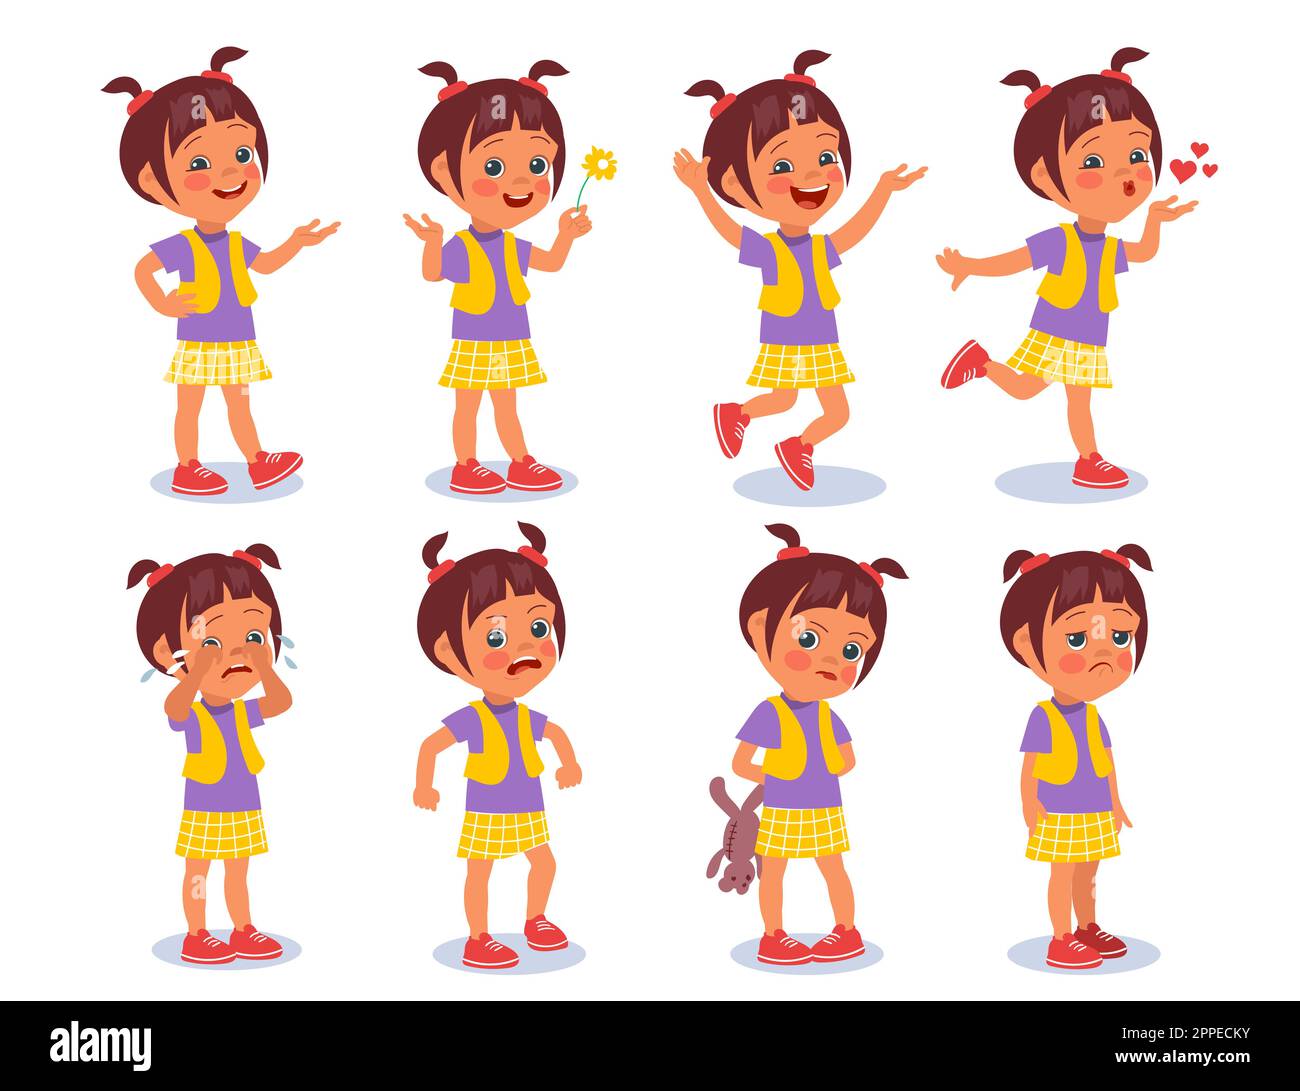 Funny Cartoon Girl Illustration for Cards and Comic Books